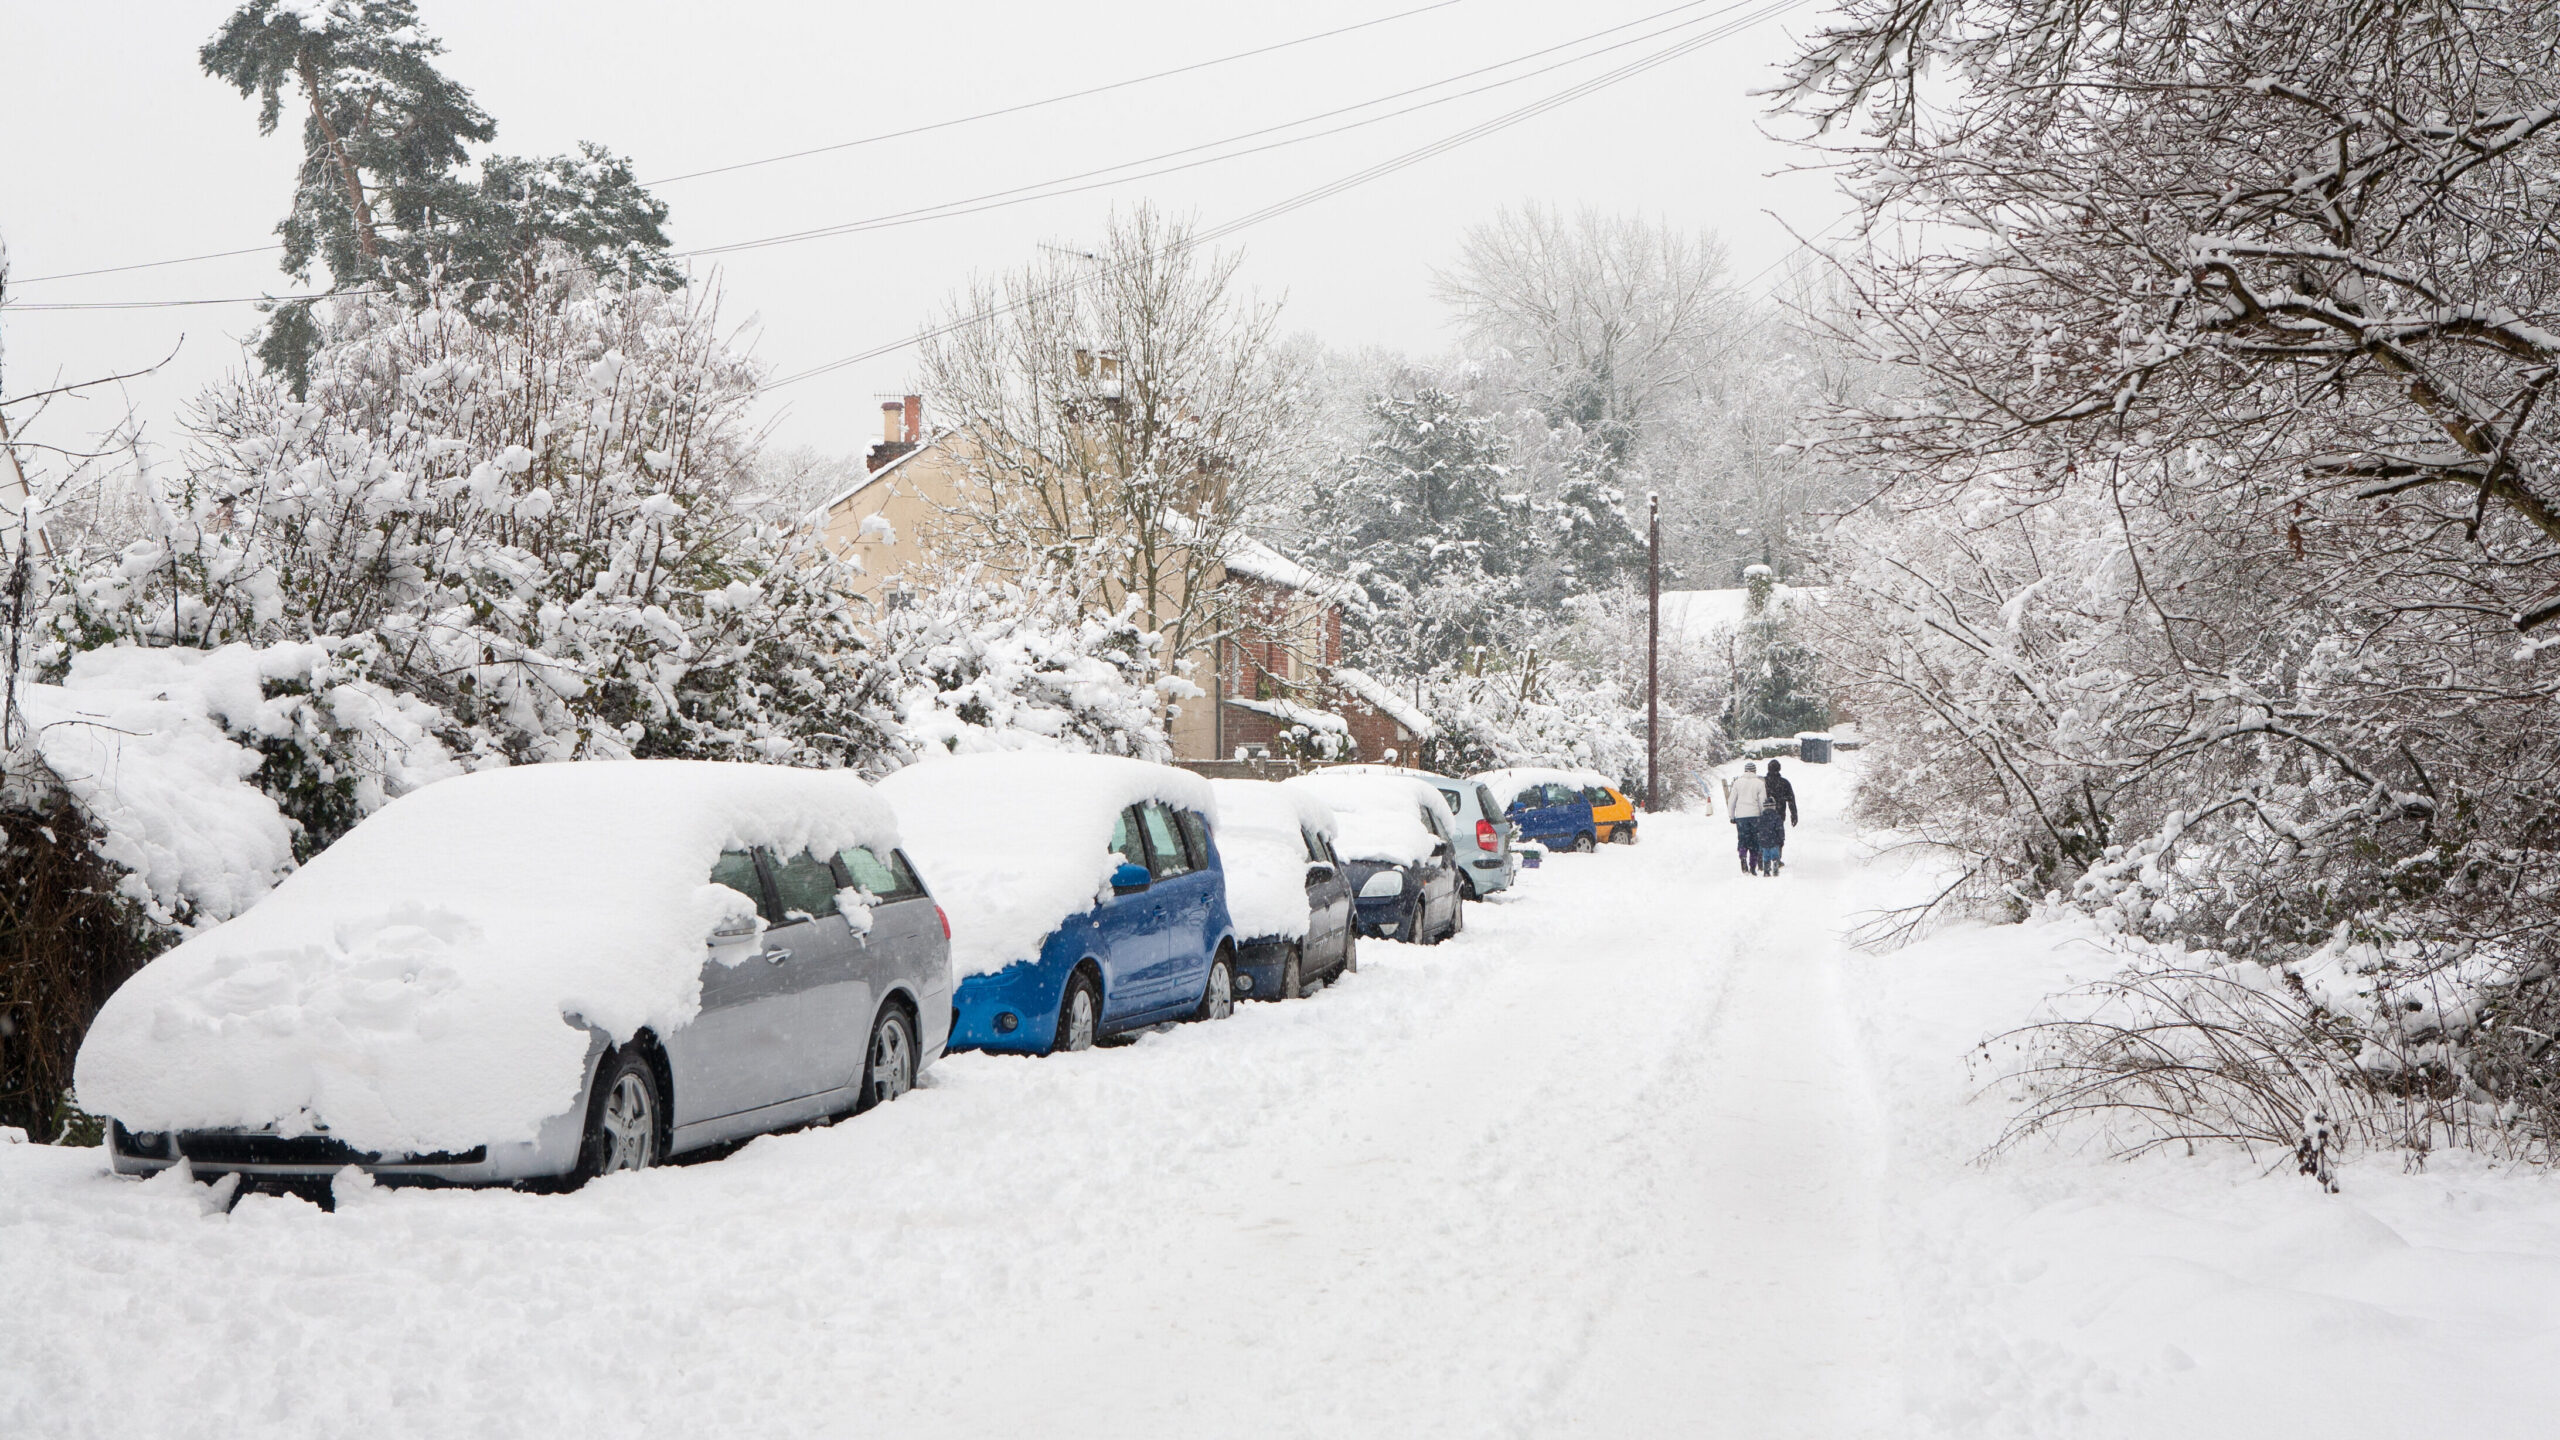 A heavily snow covered road in a residential area with several snow covered cars.